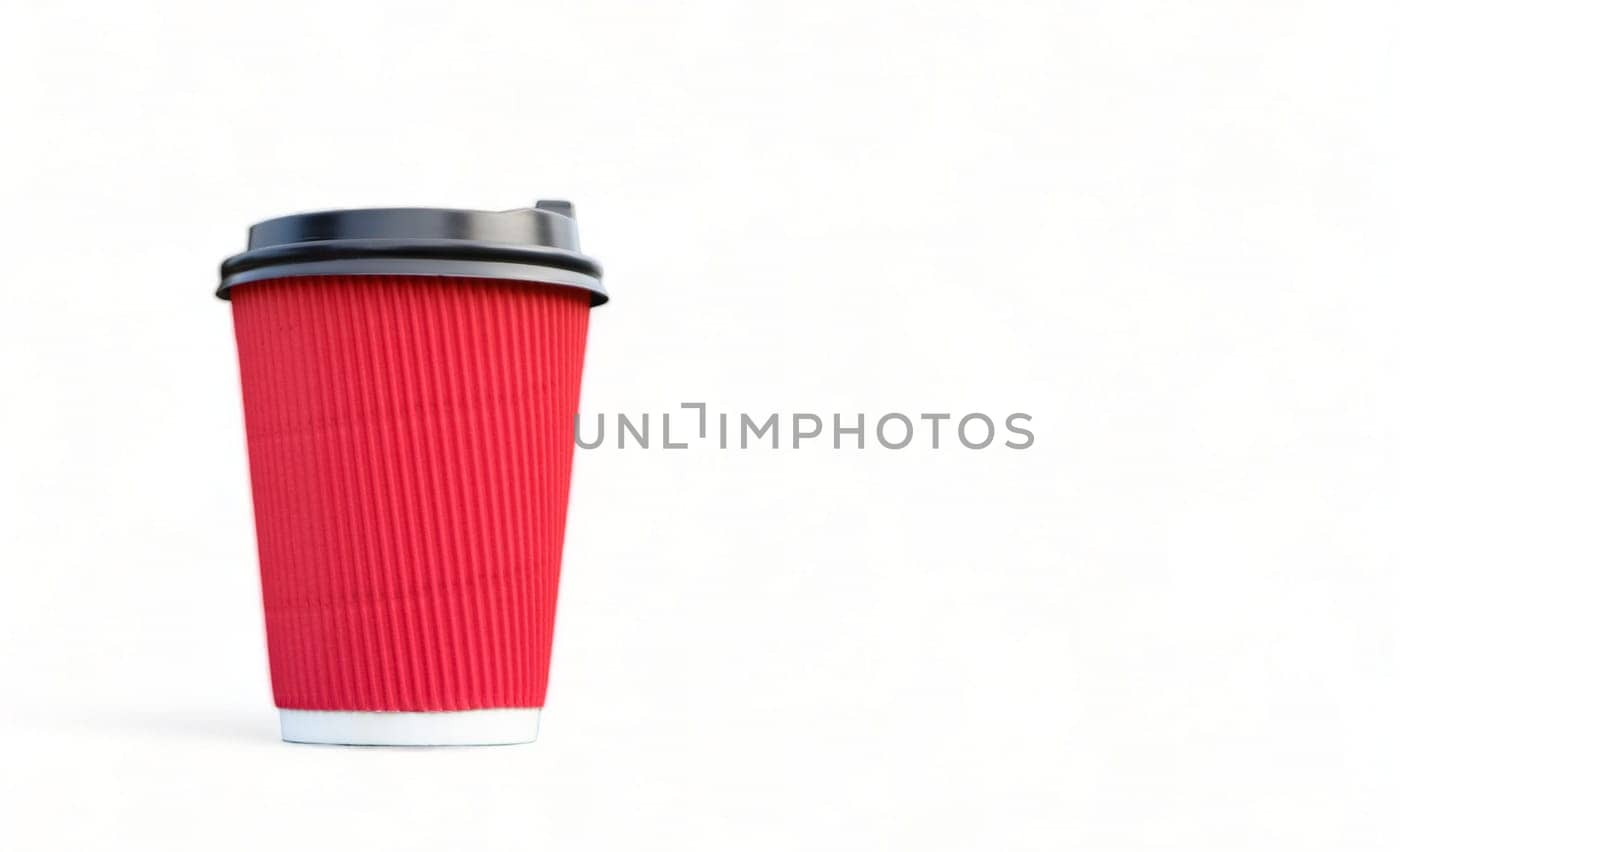 Paper disposable red glass of tea or coffee with black plastic lid isolated on white background. Takeaway food. Nobody. Place for an inscription